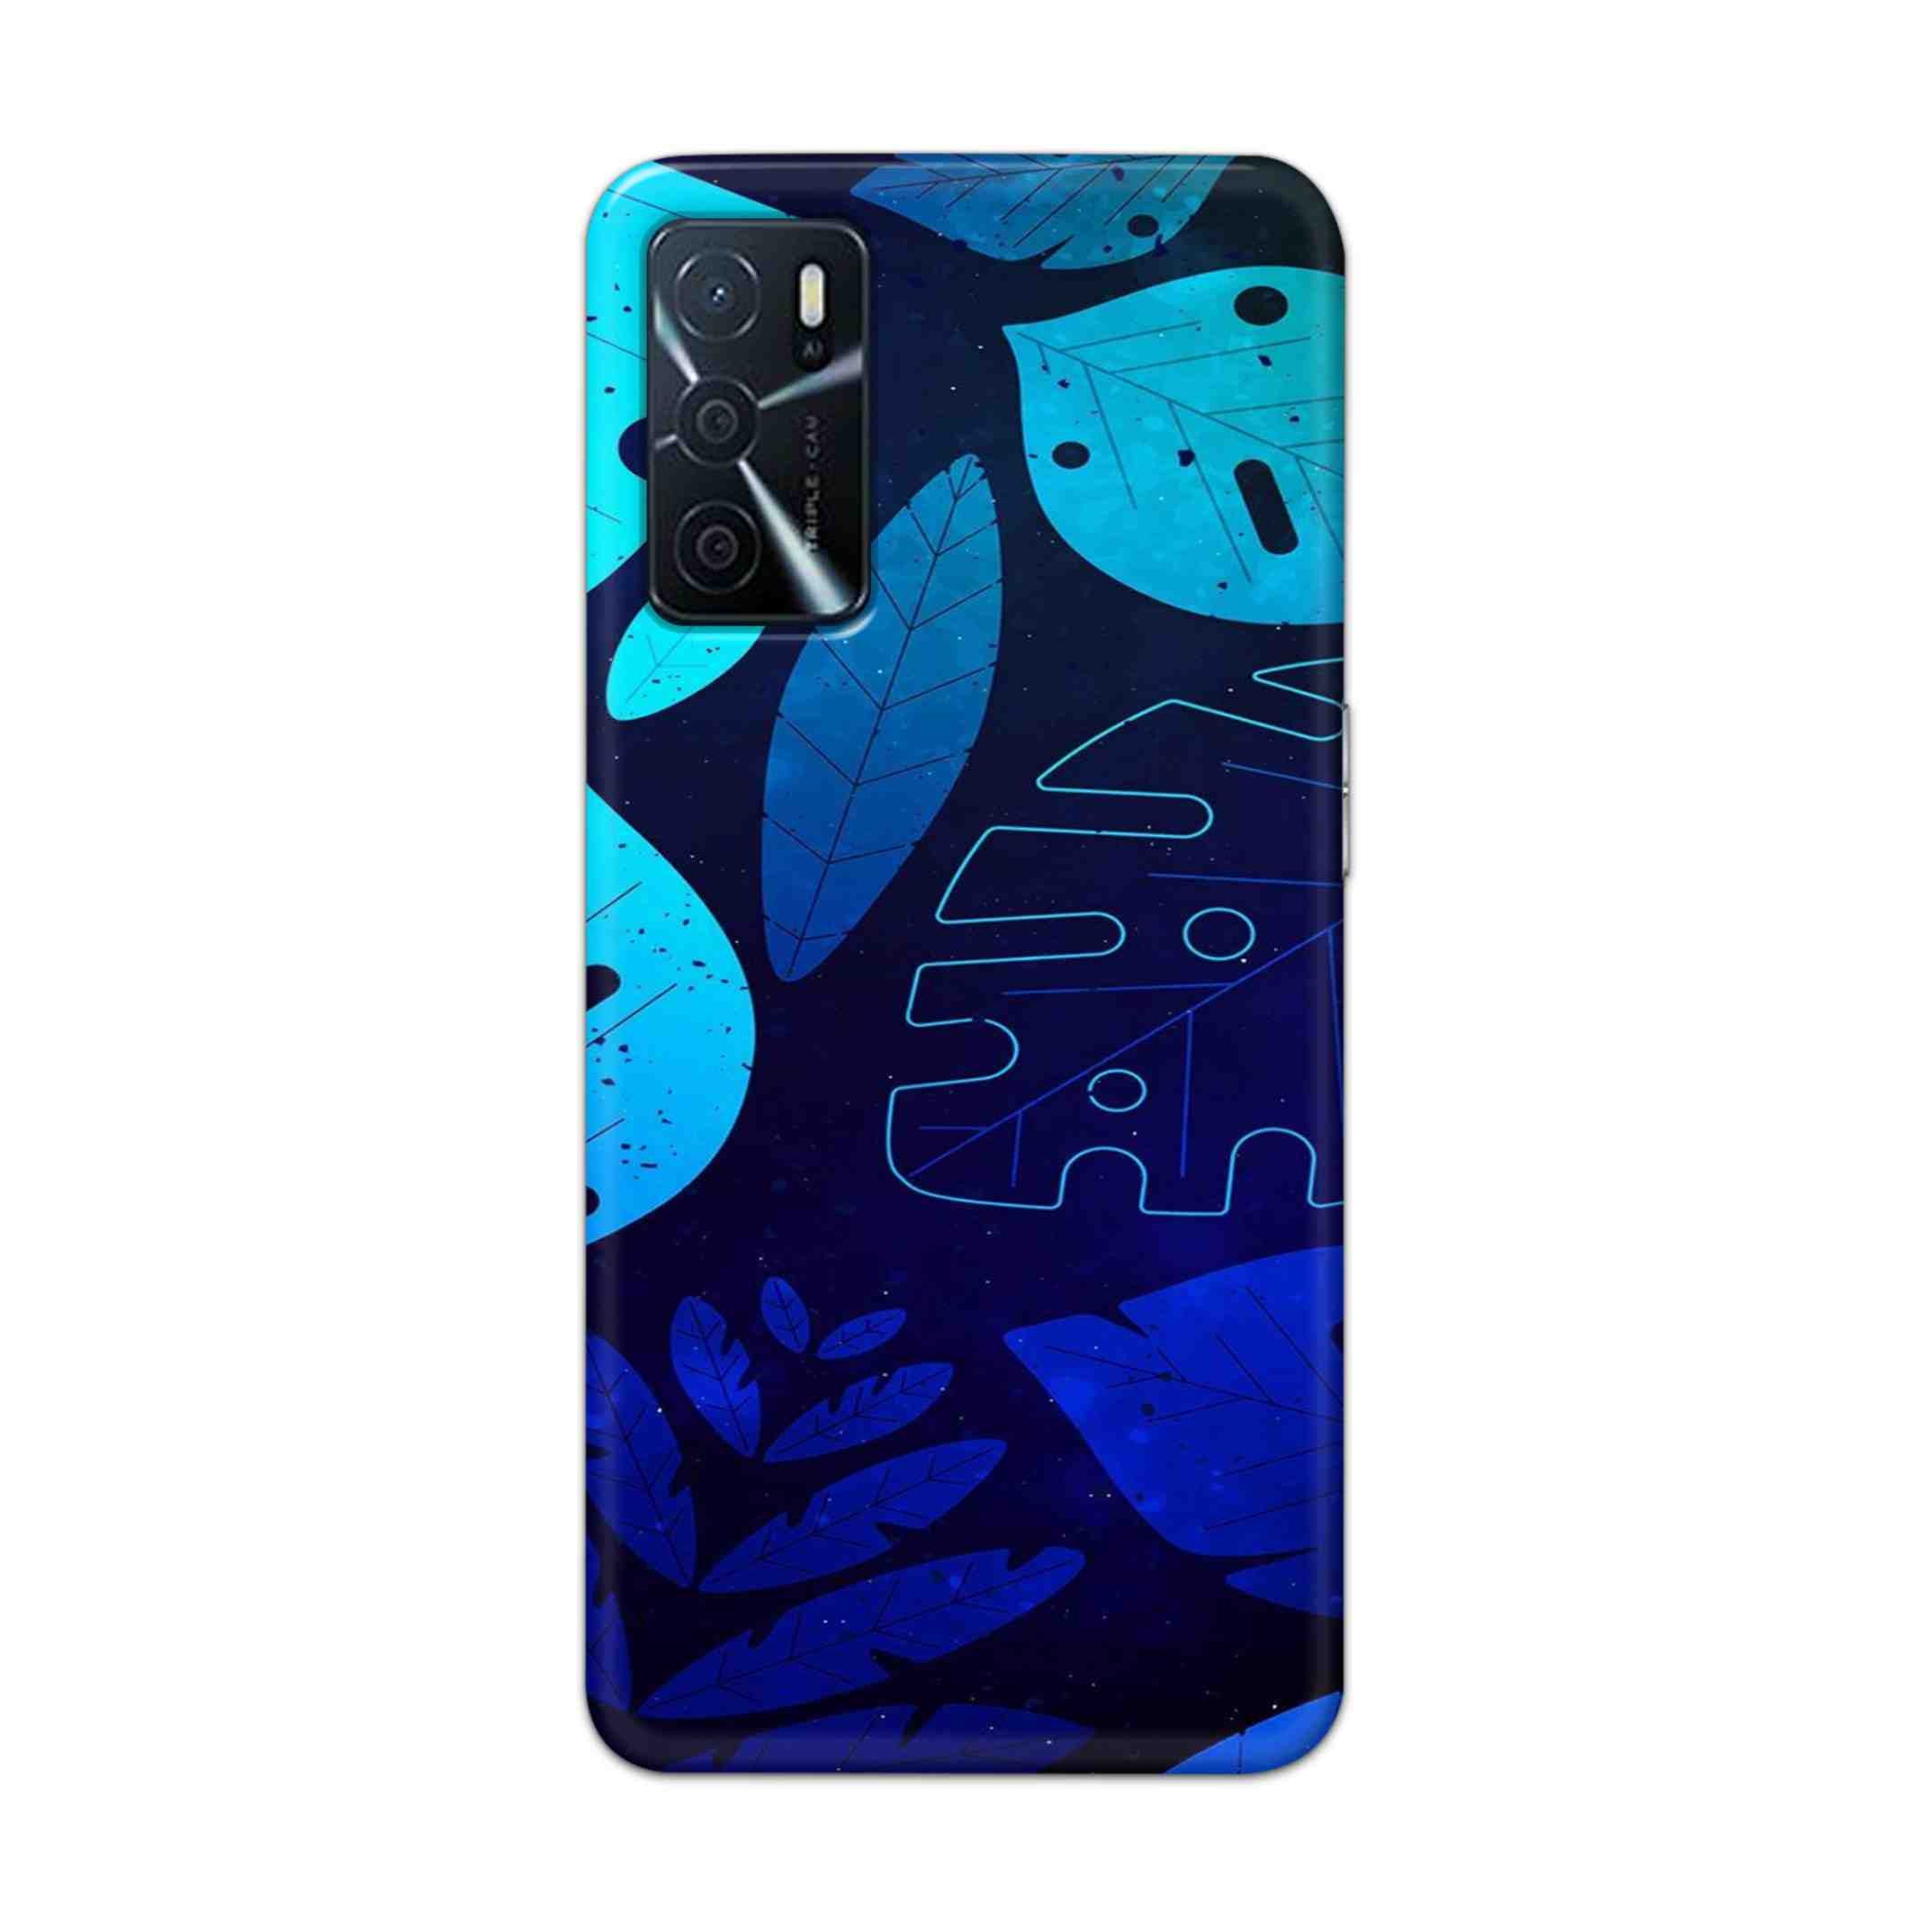 Buy Neon Leaf Hard Back Mobile Phone Case Cover For Oppo A16 Online